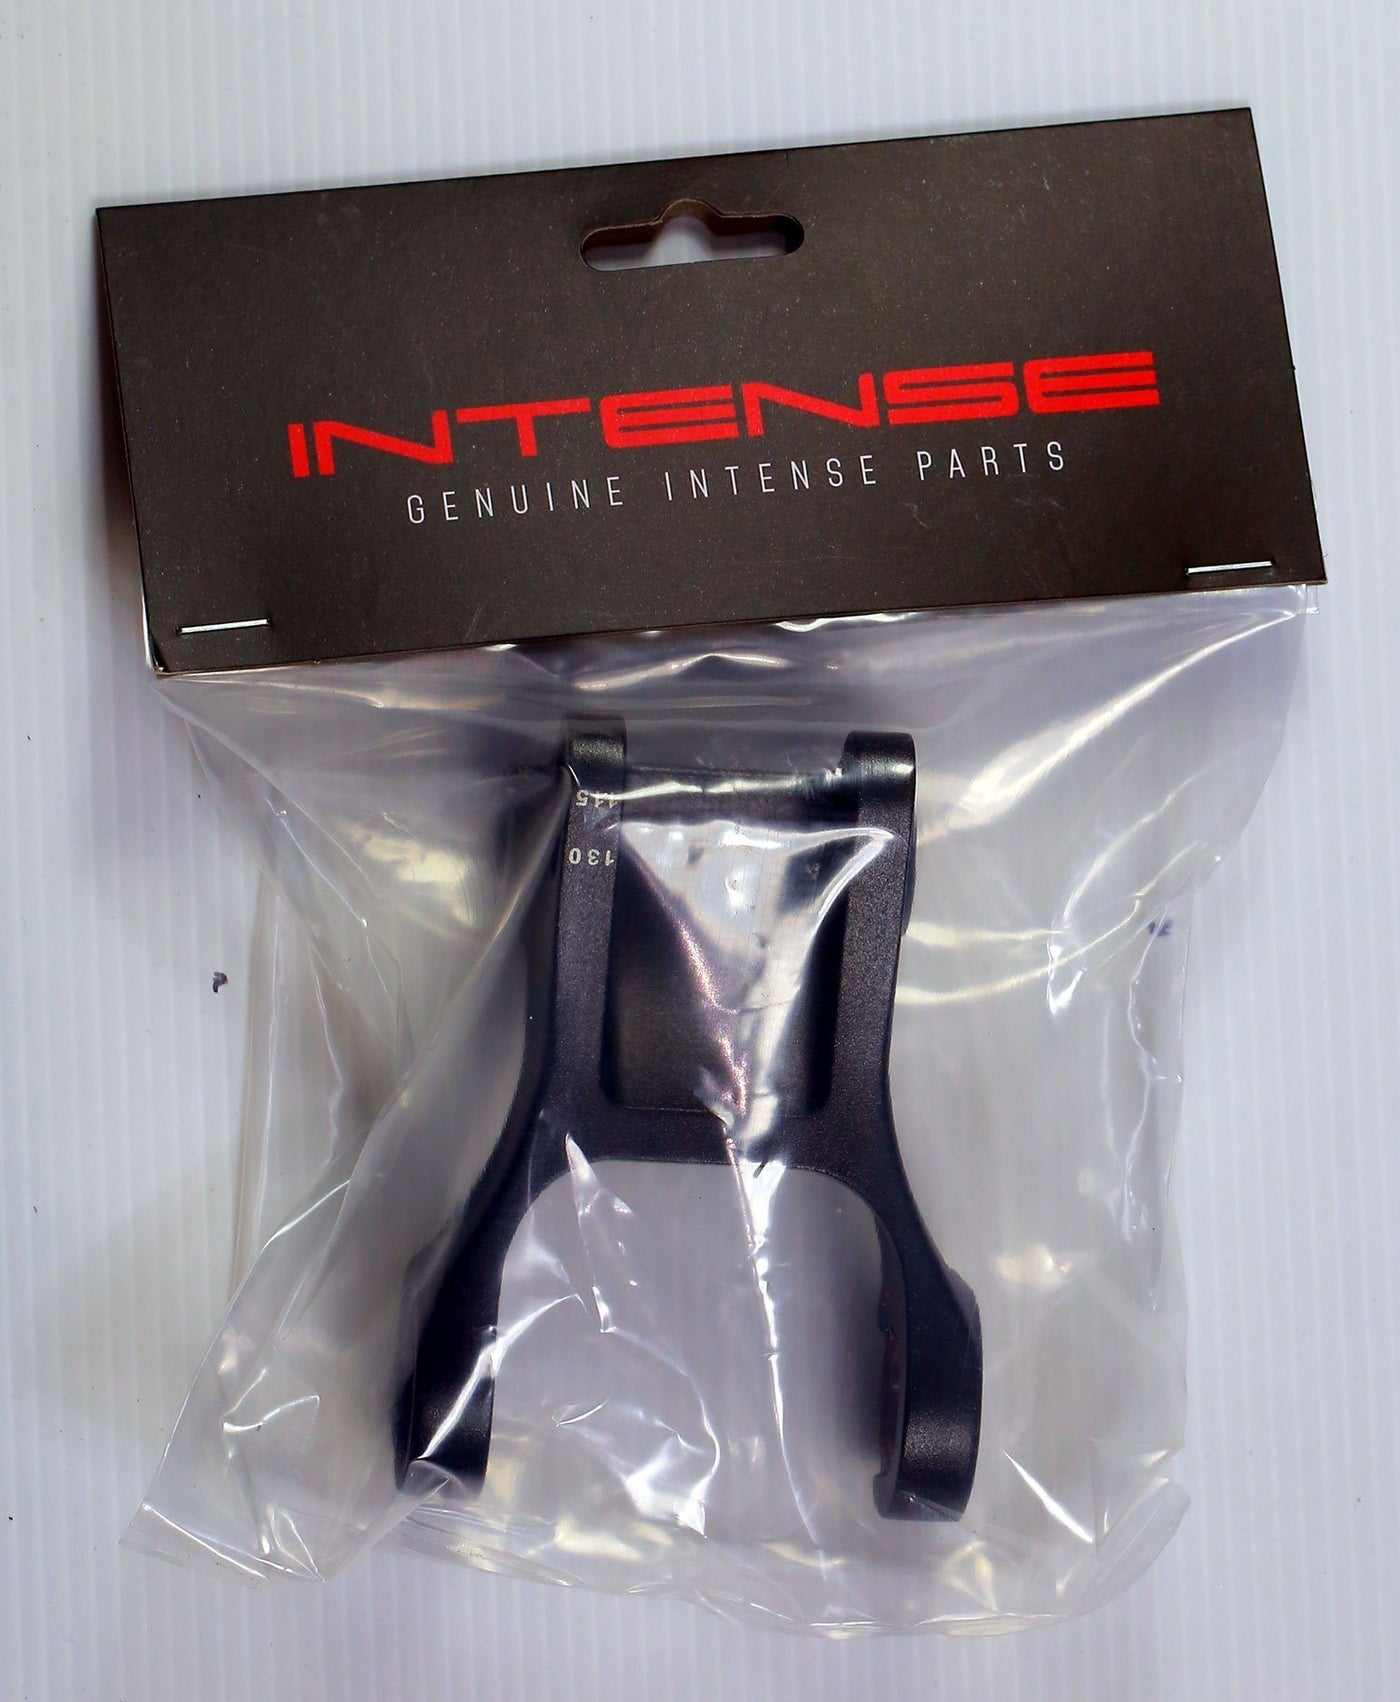 Upper Link Kit Forged (Spider 29) Replacement Parts Intense LLC 